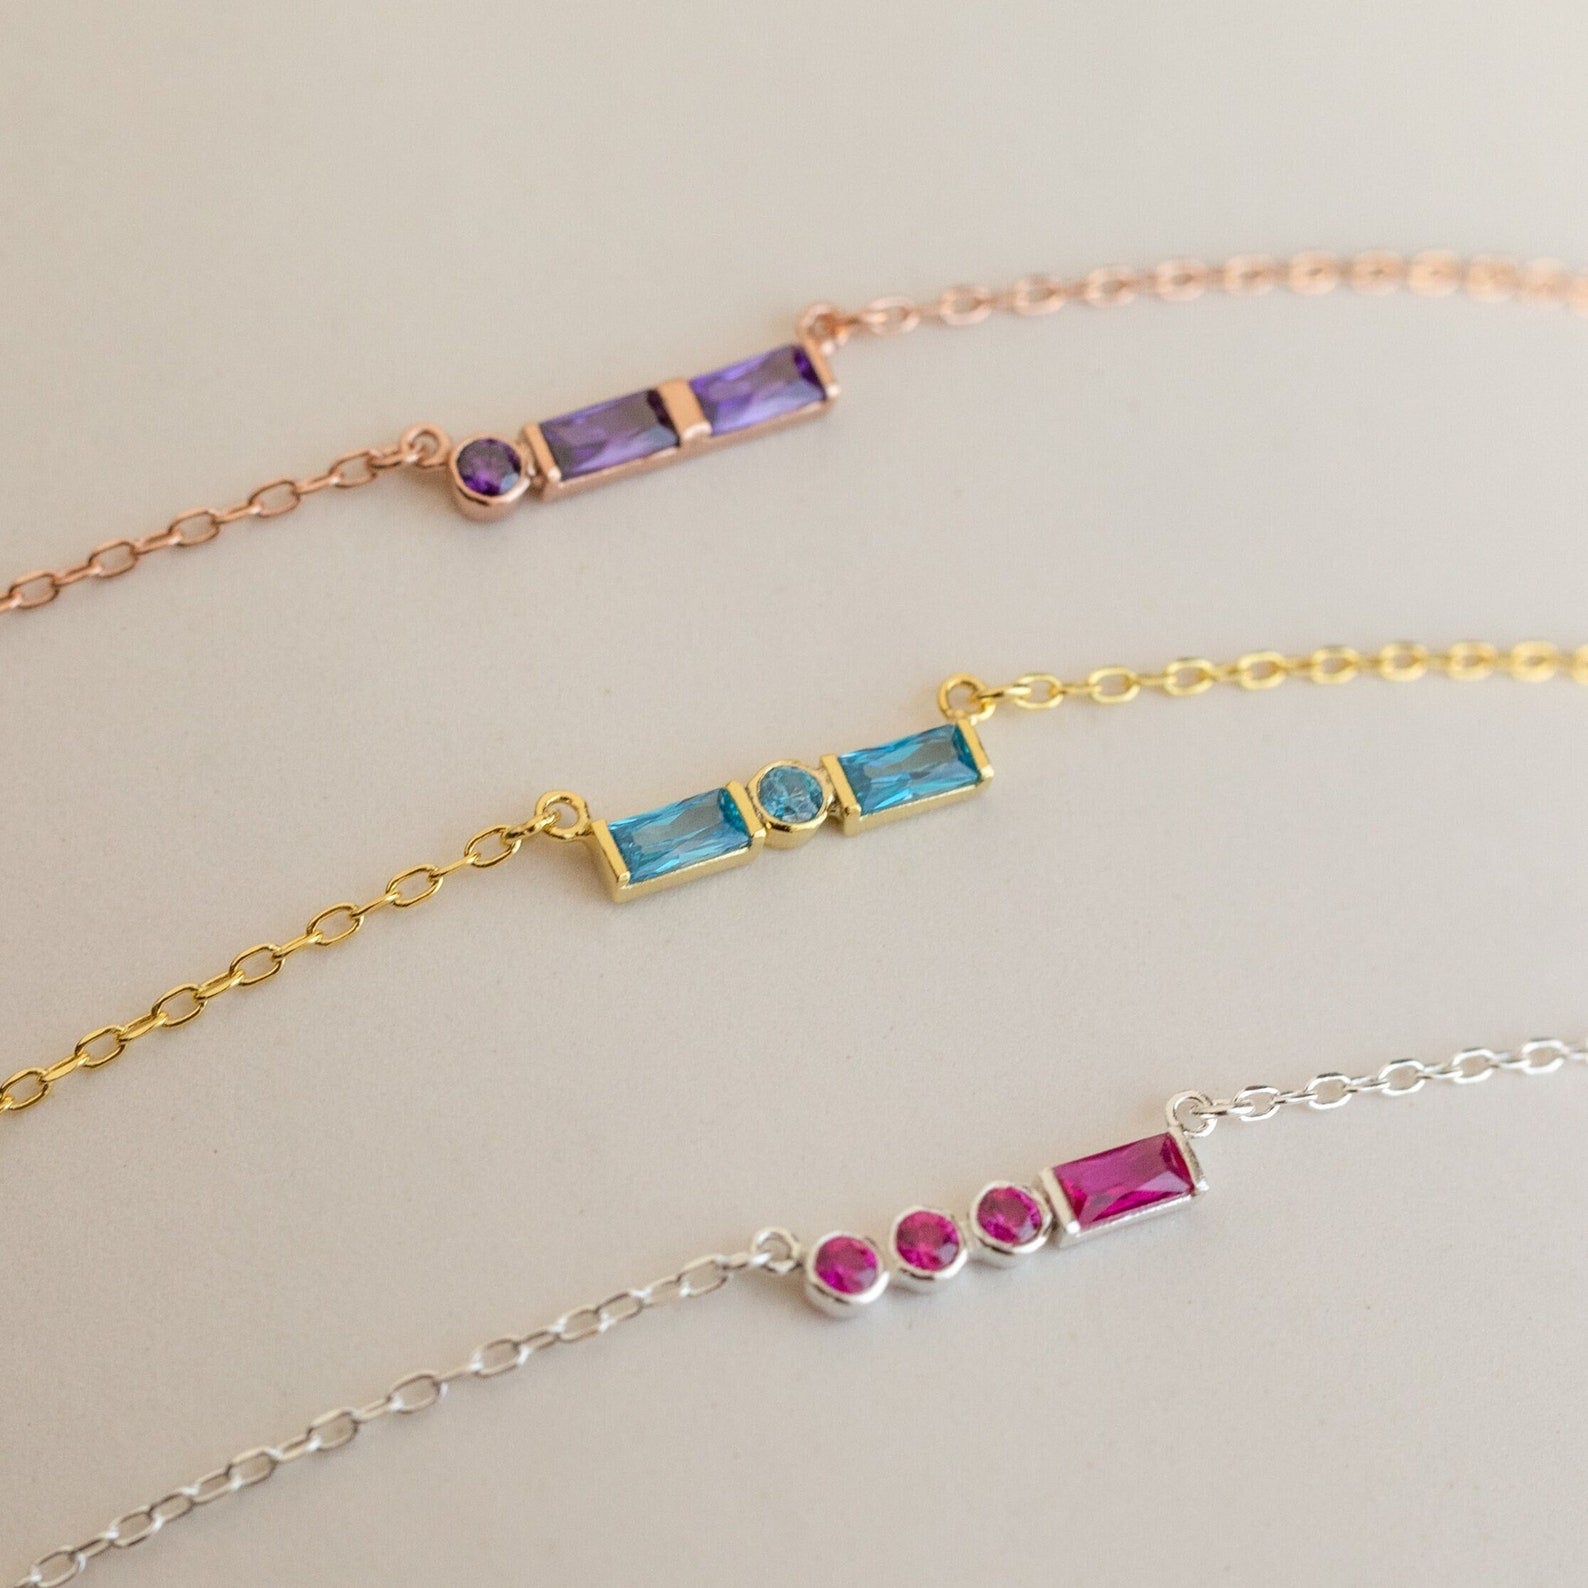 Personalized Stackable Birthstone Charm Necklace | Eve's Addiction